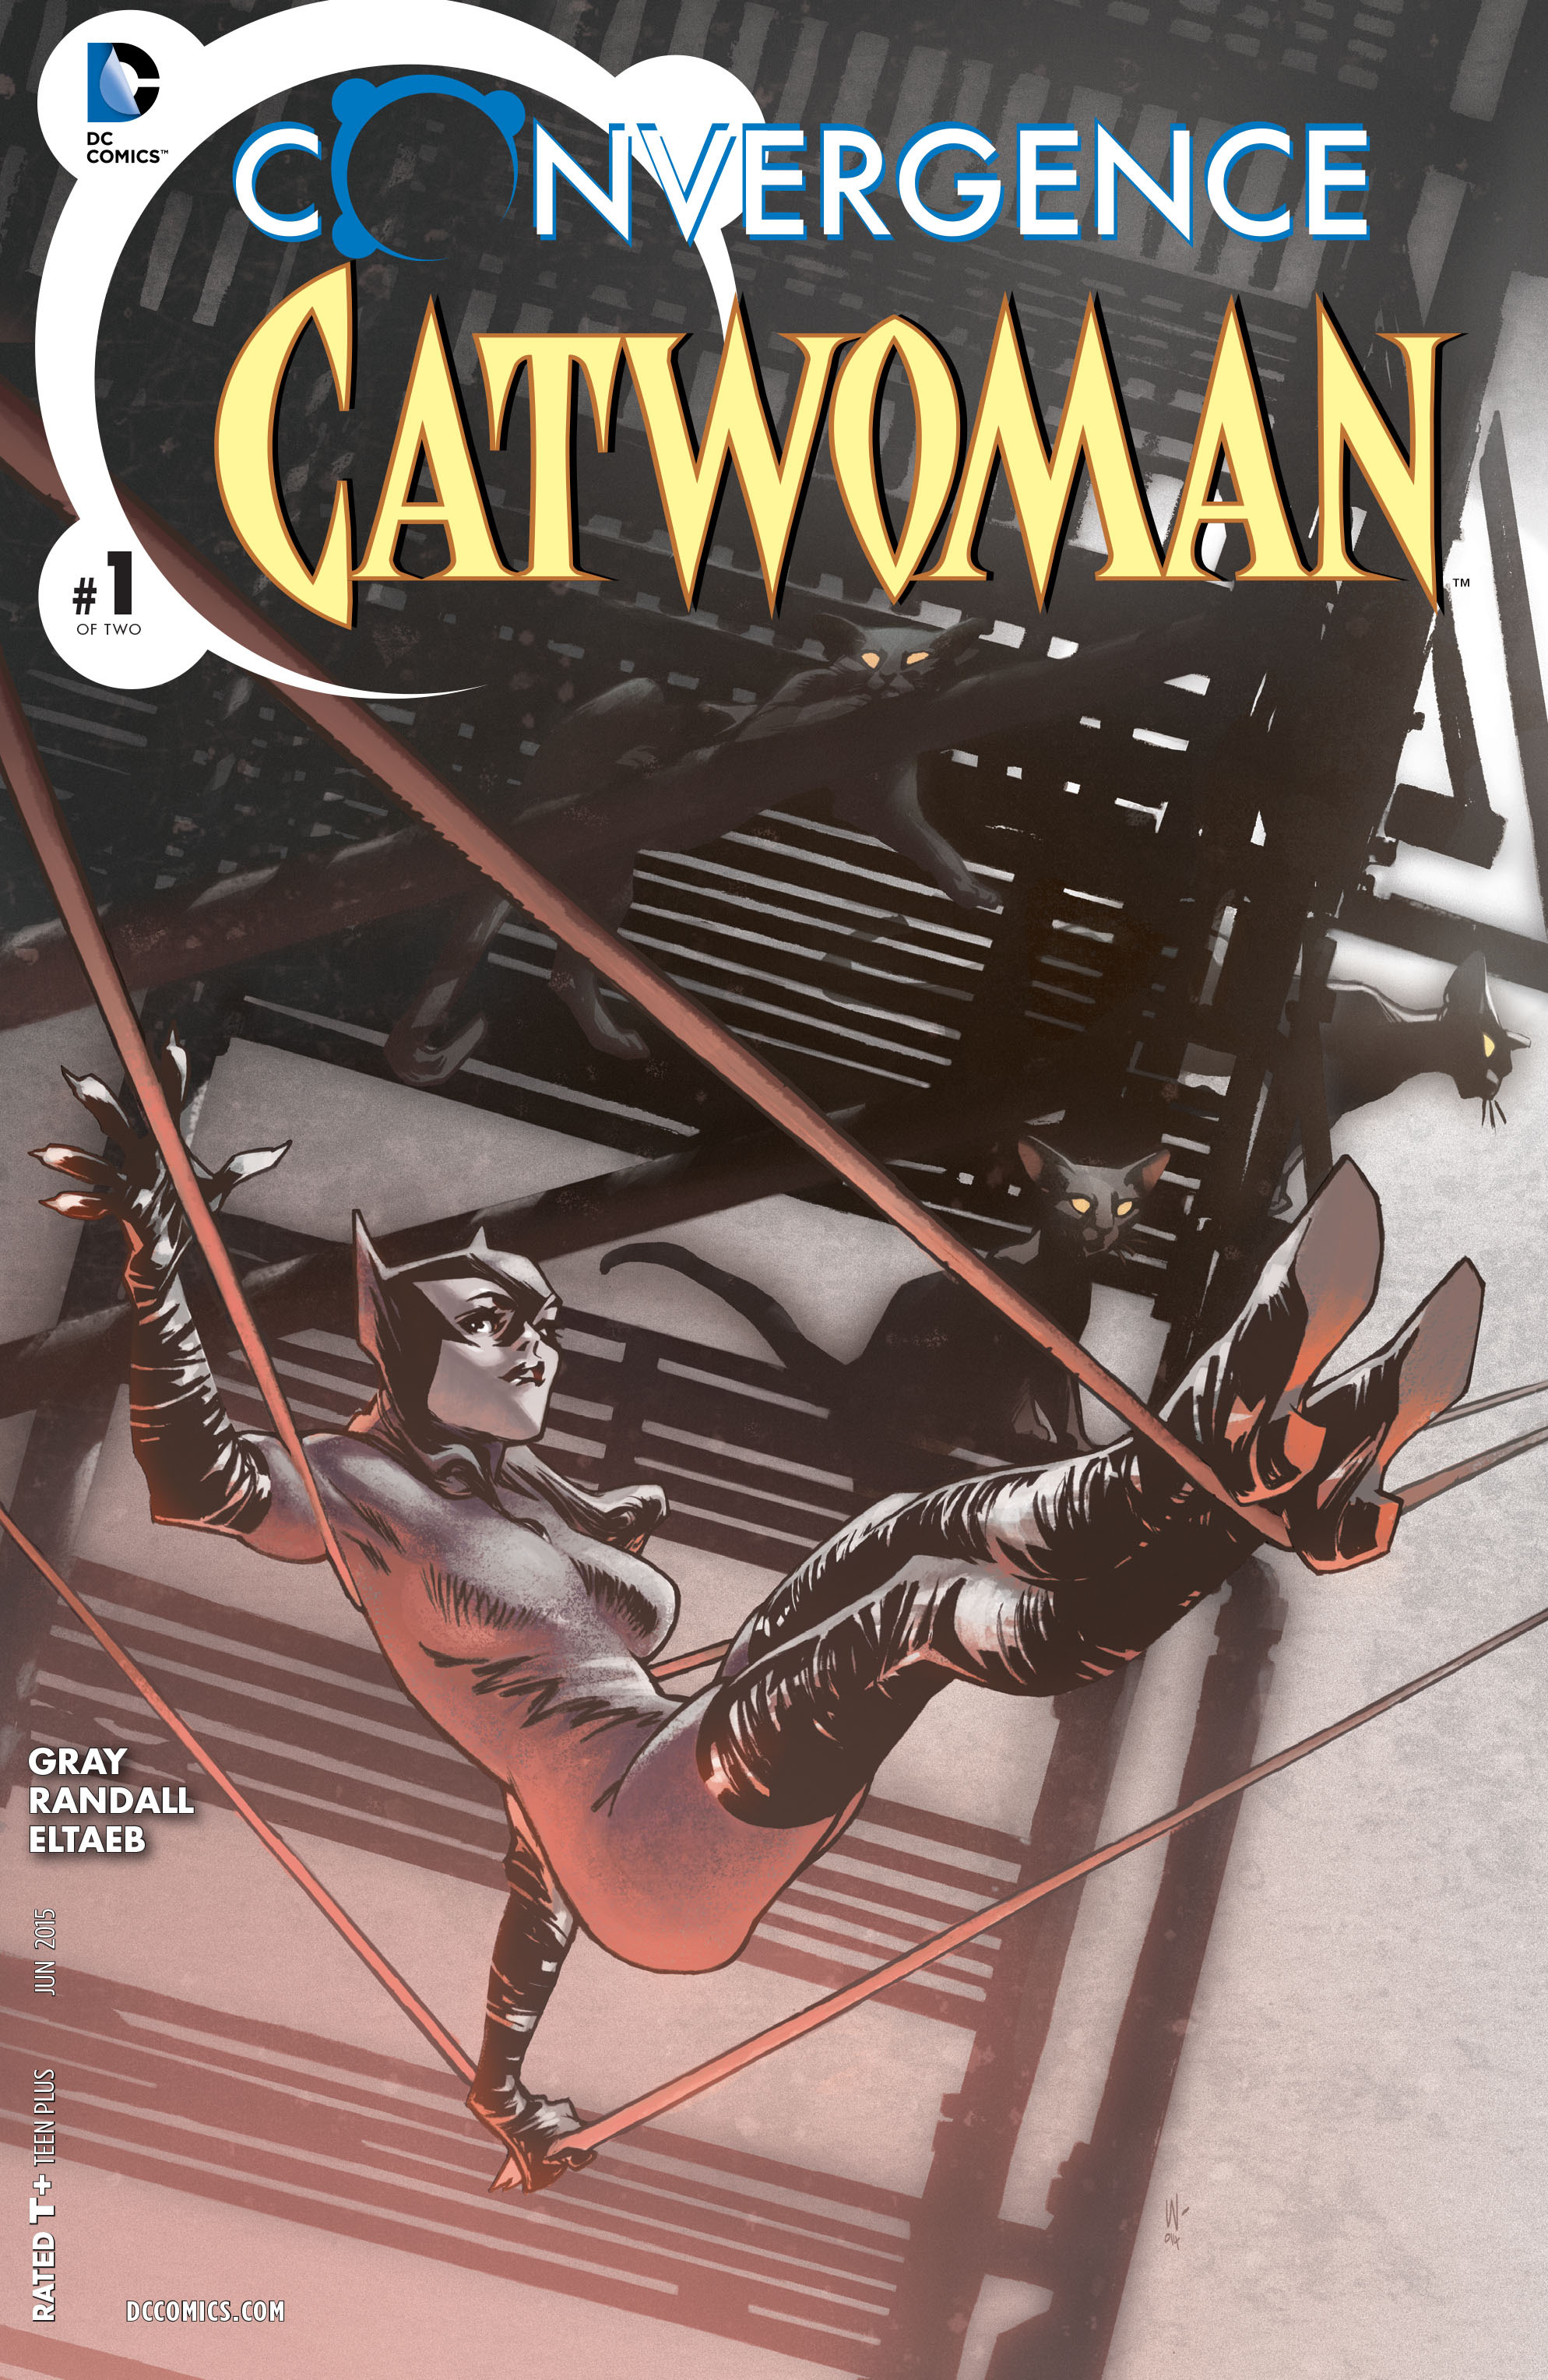 Read online Convergence Catwoman comic -  Issue #1 - 1